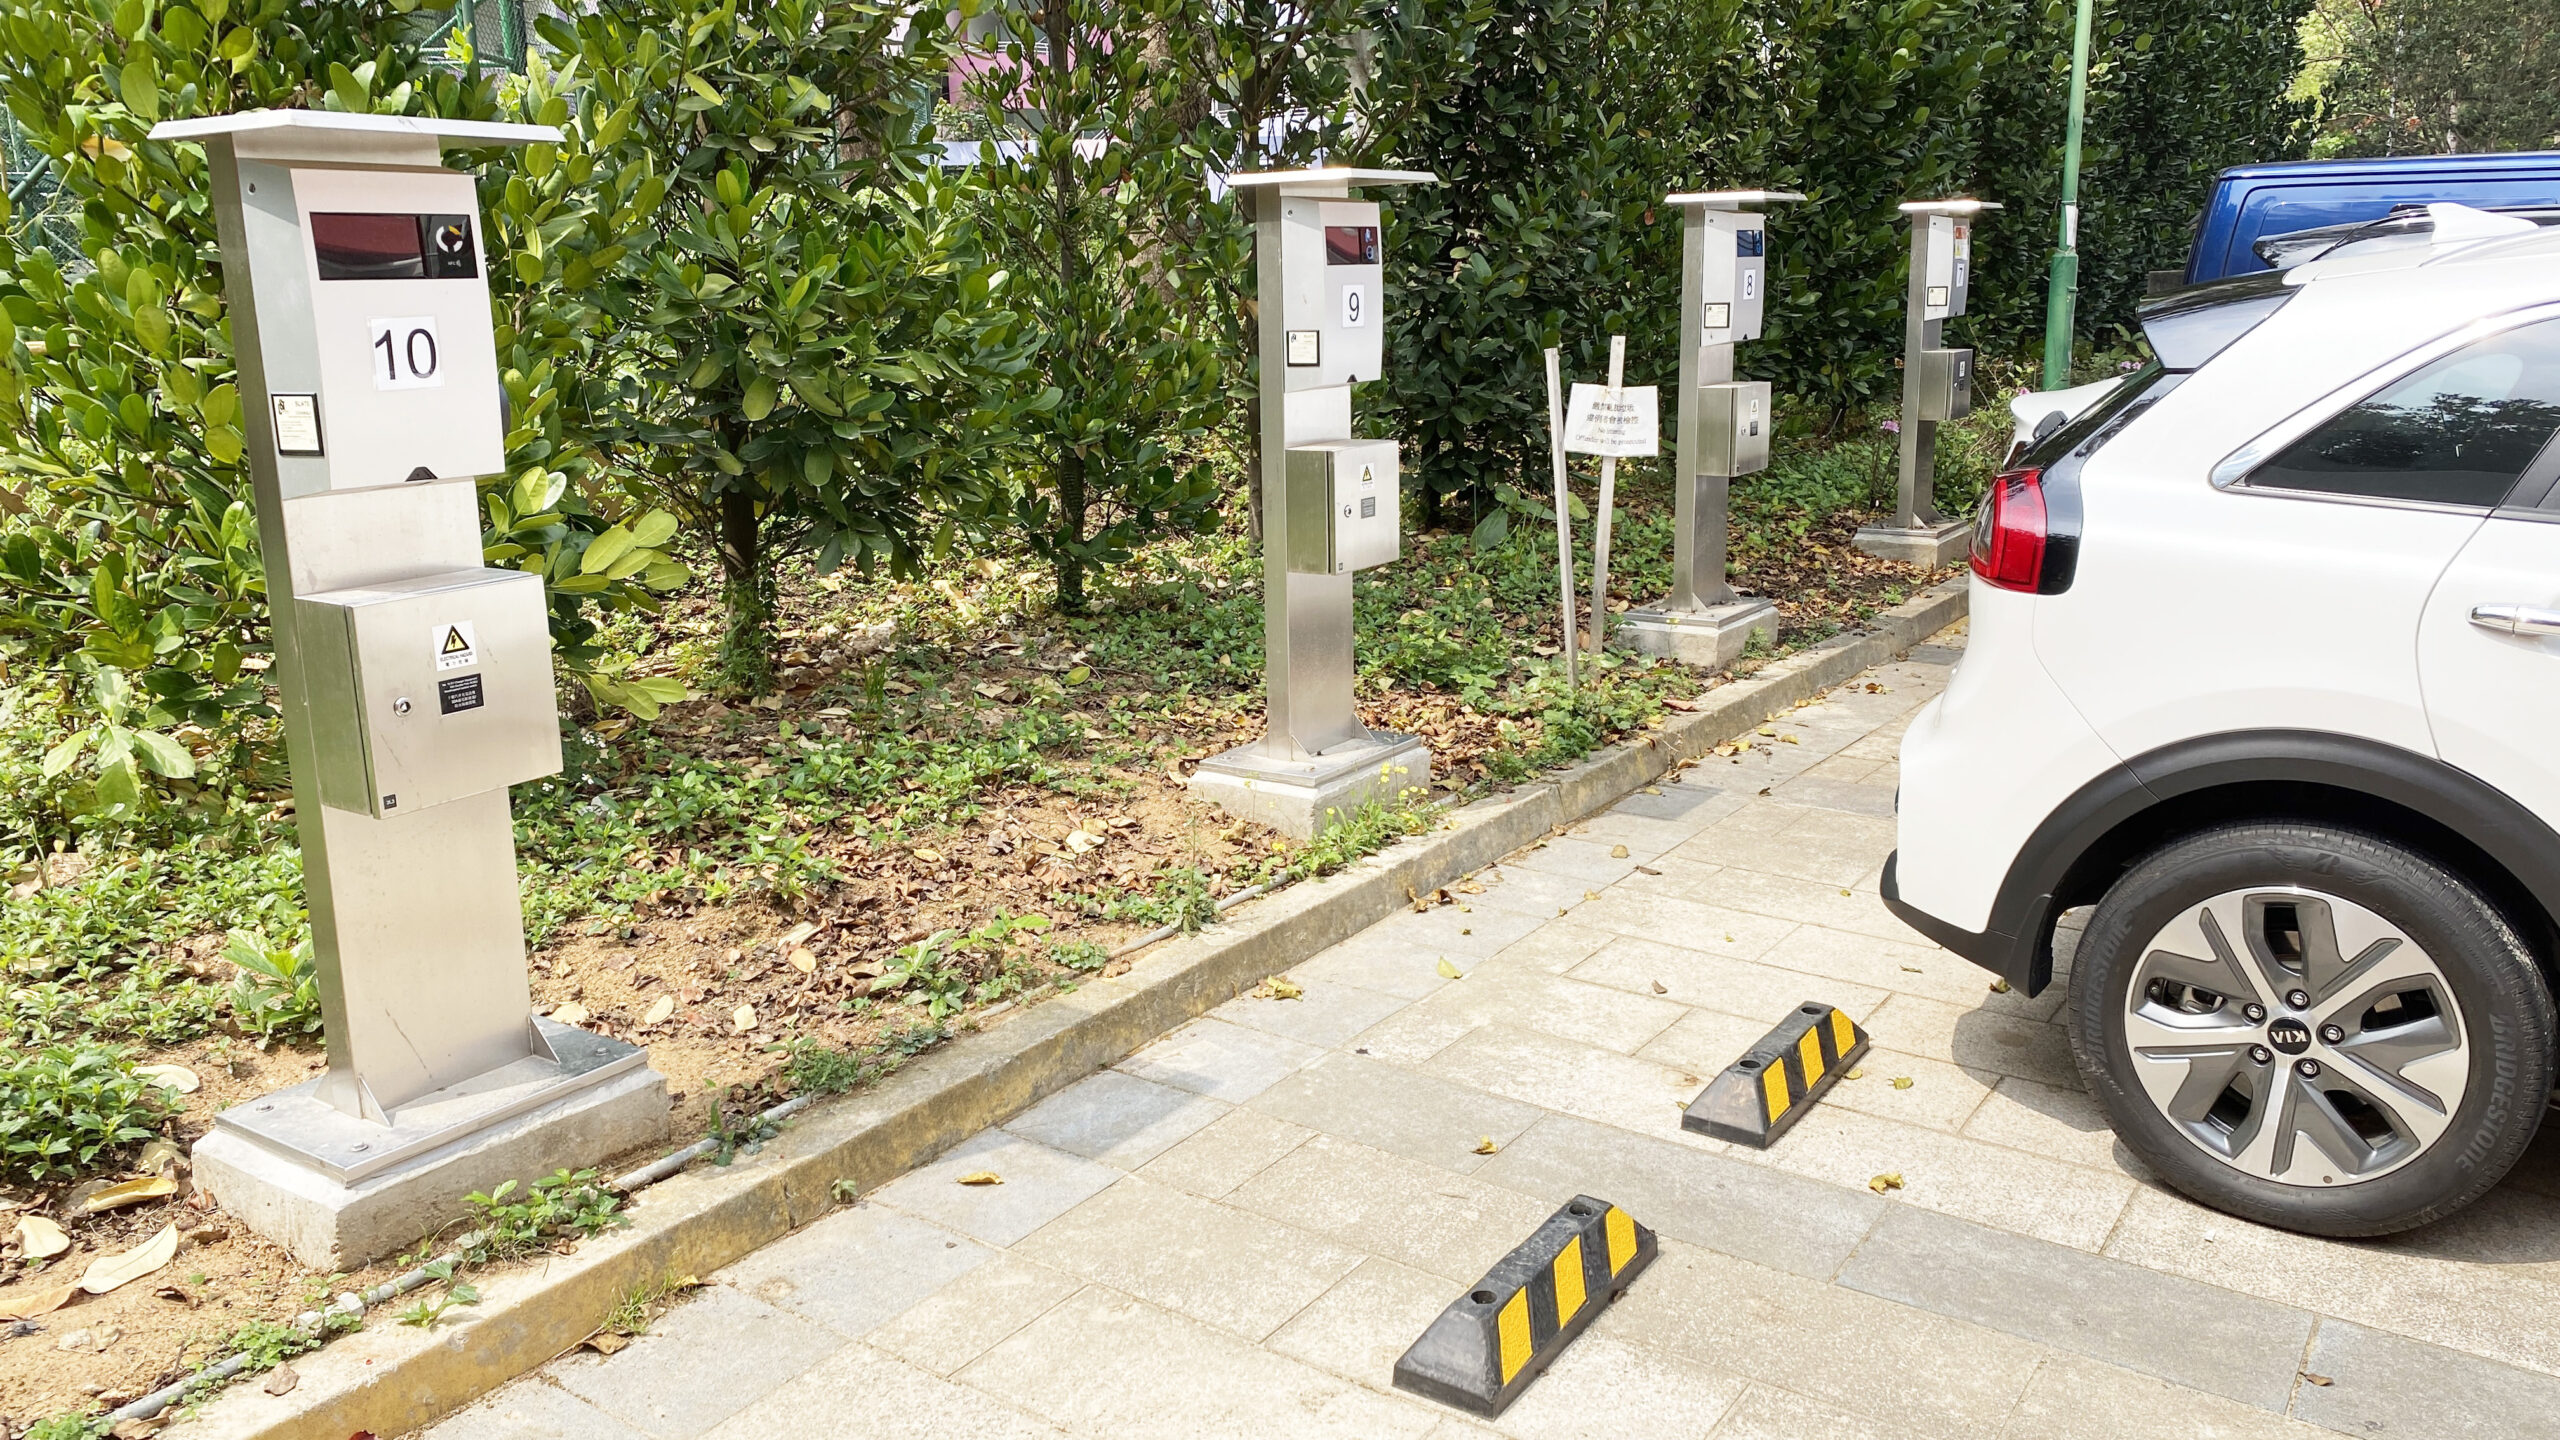 Setting up 400 additional charging points at public car parks, malls, public recreational facilities and remote areas